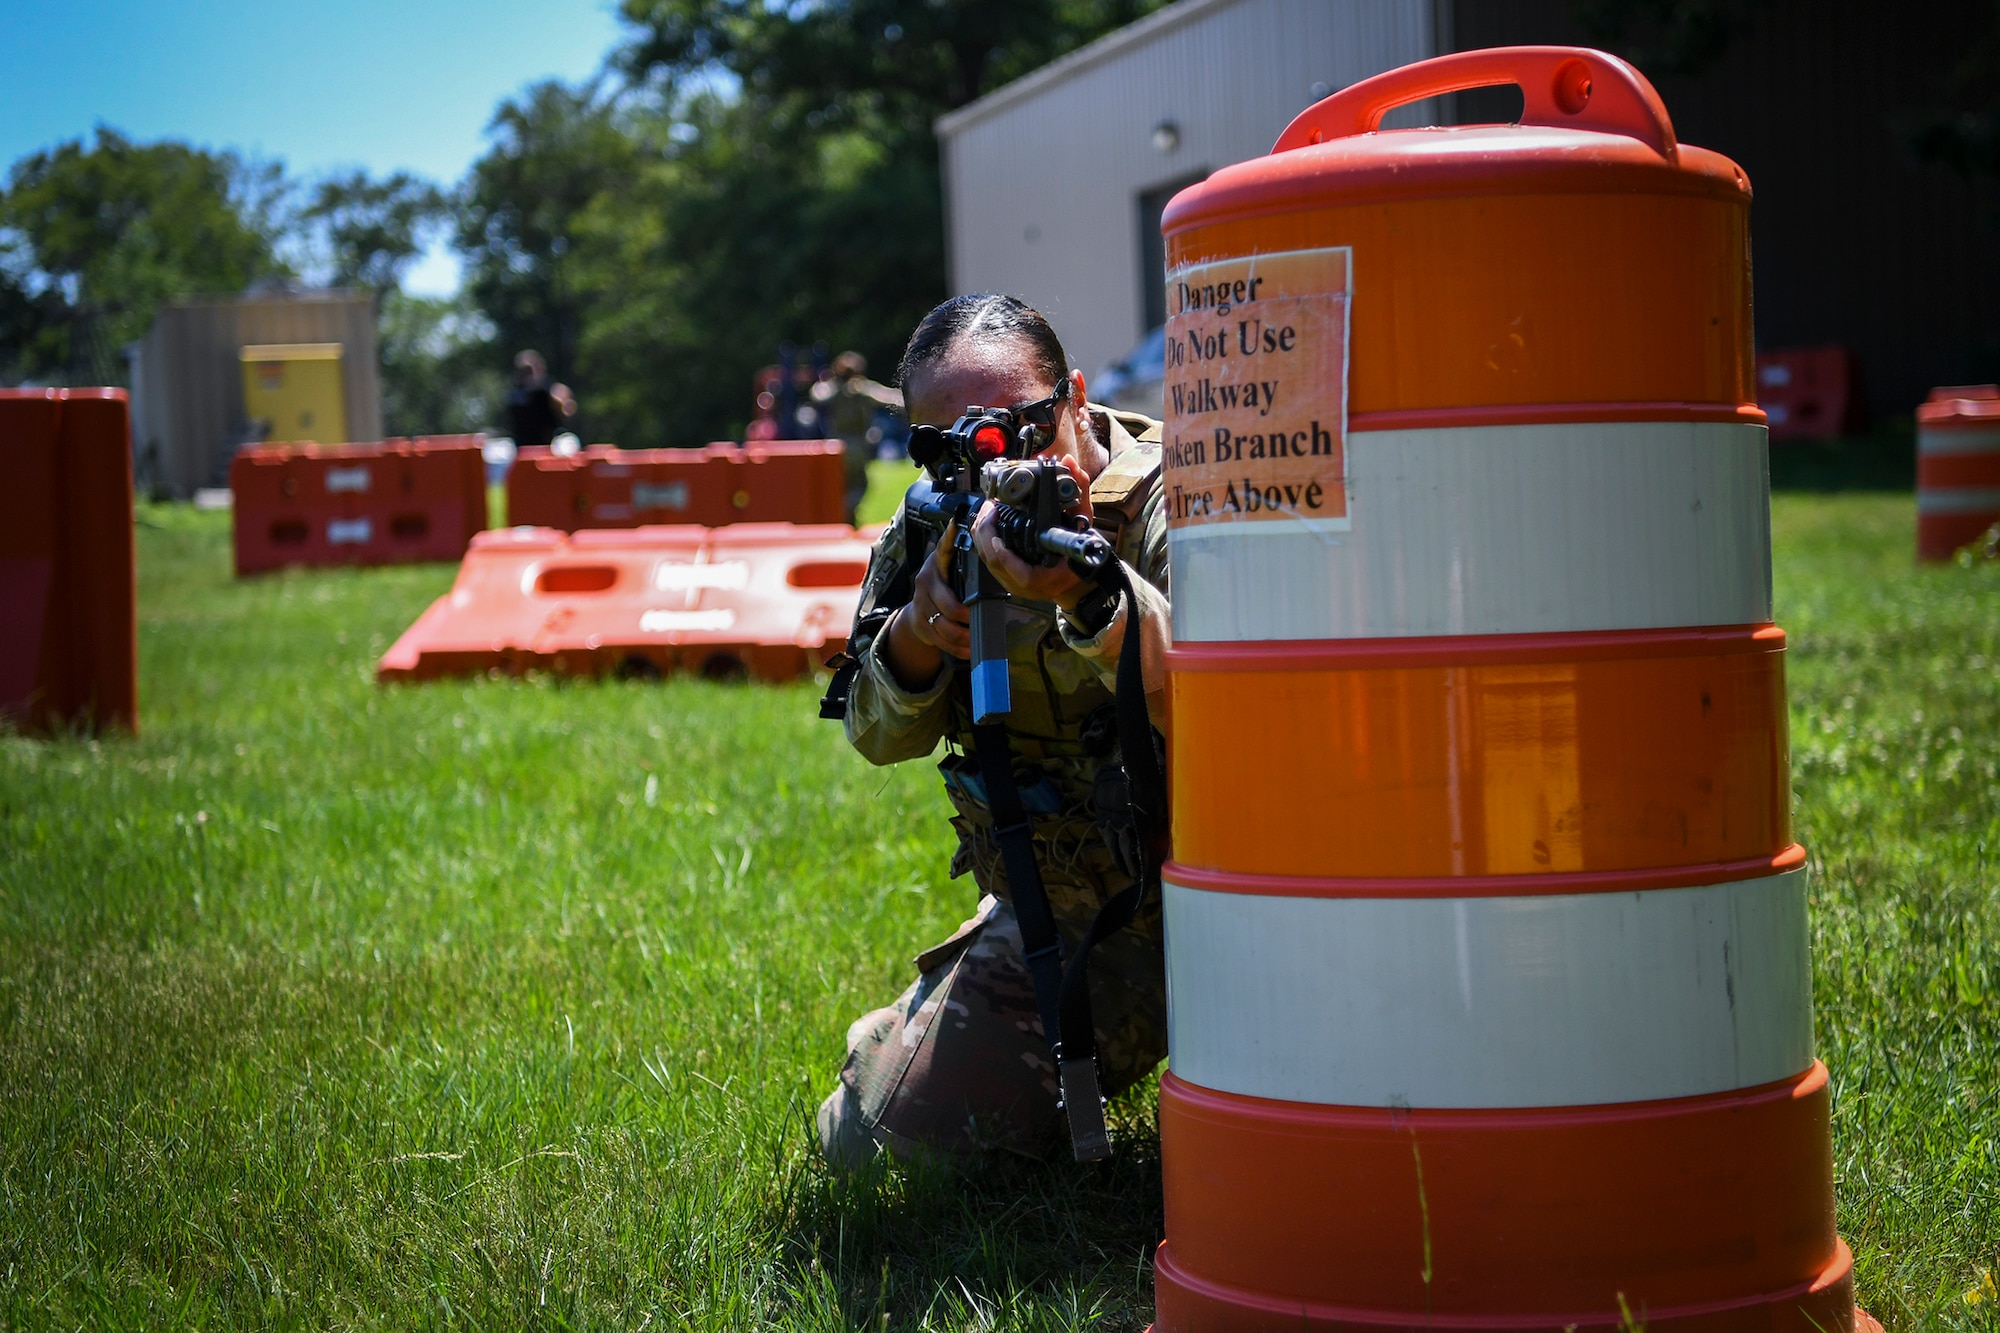 Senior Airman Adrianna Williams, 66th Security Forces Squadron entry controller, shoots from behind a blockade while wearing female body armor during a tactical exercise at Hanscom Air Force Base, Mass., June 29.  The newest development in Air Force body armor is designed to better protect female Airmen during combat and contingency operations. (U.S. Air Force photo by Lauren Russell)